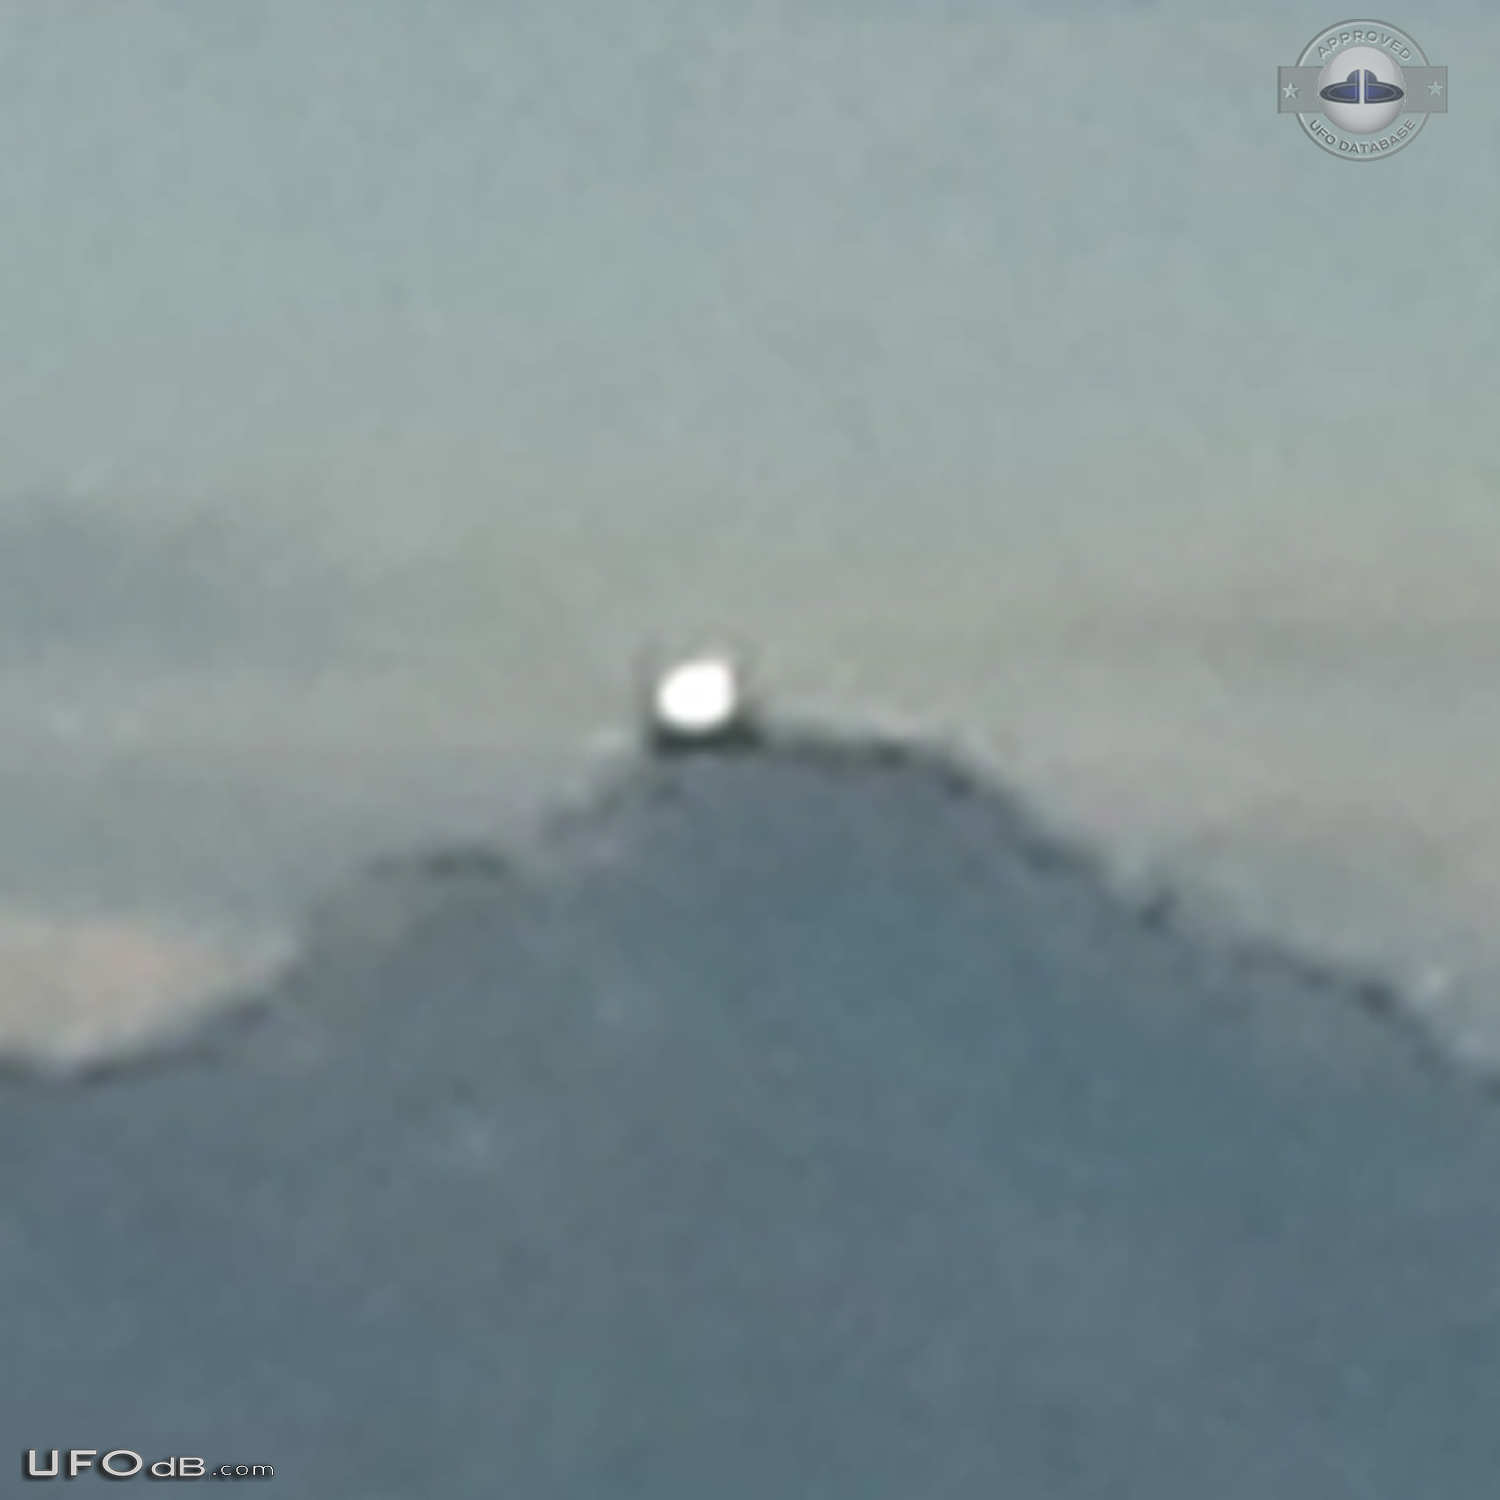 Looked to mountain. saw gigantic hovering ufo - Lake Stevens USA 2015 UFO Picture #703-5